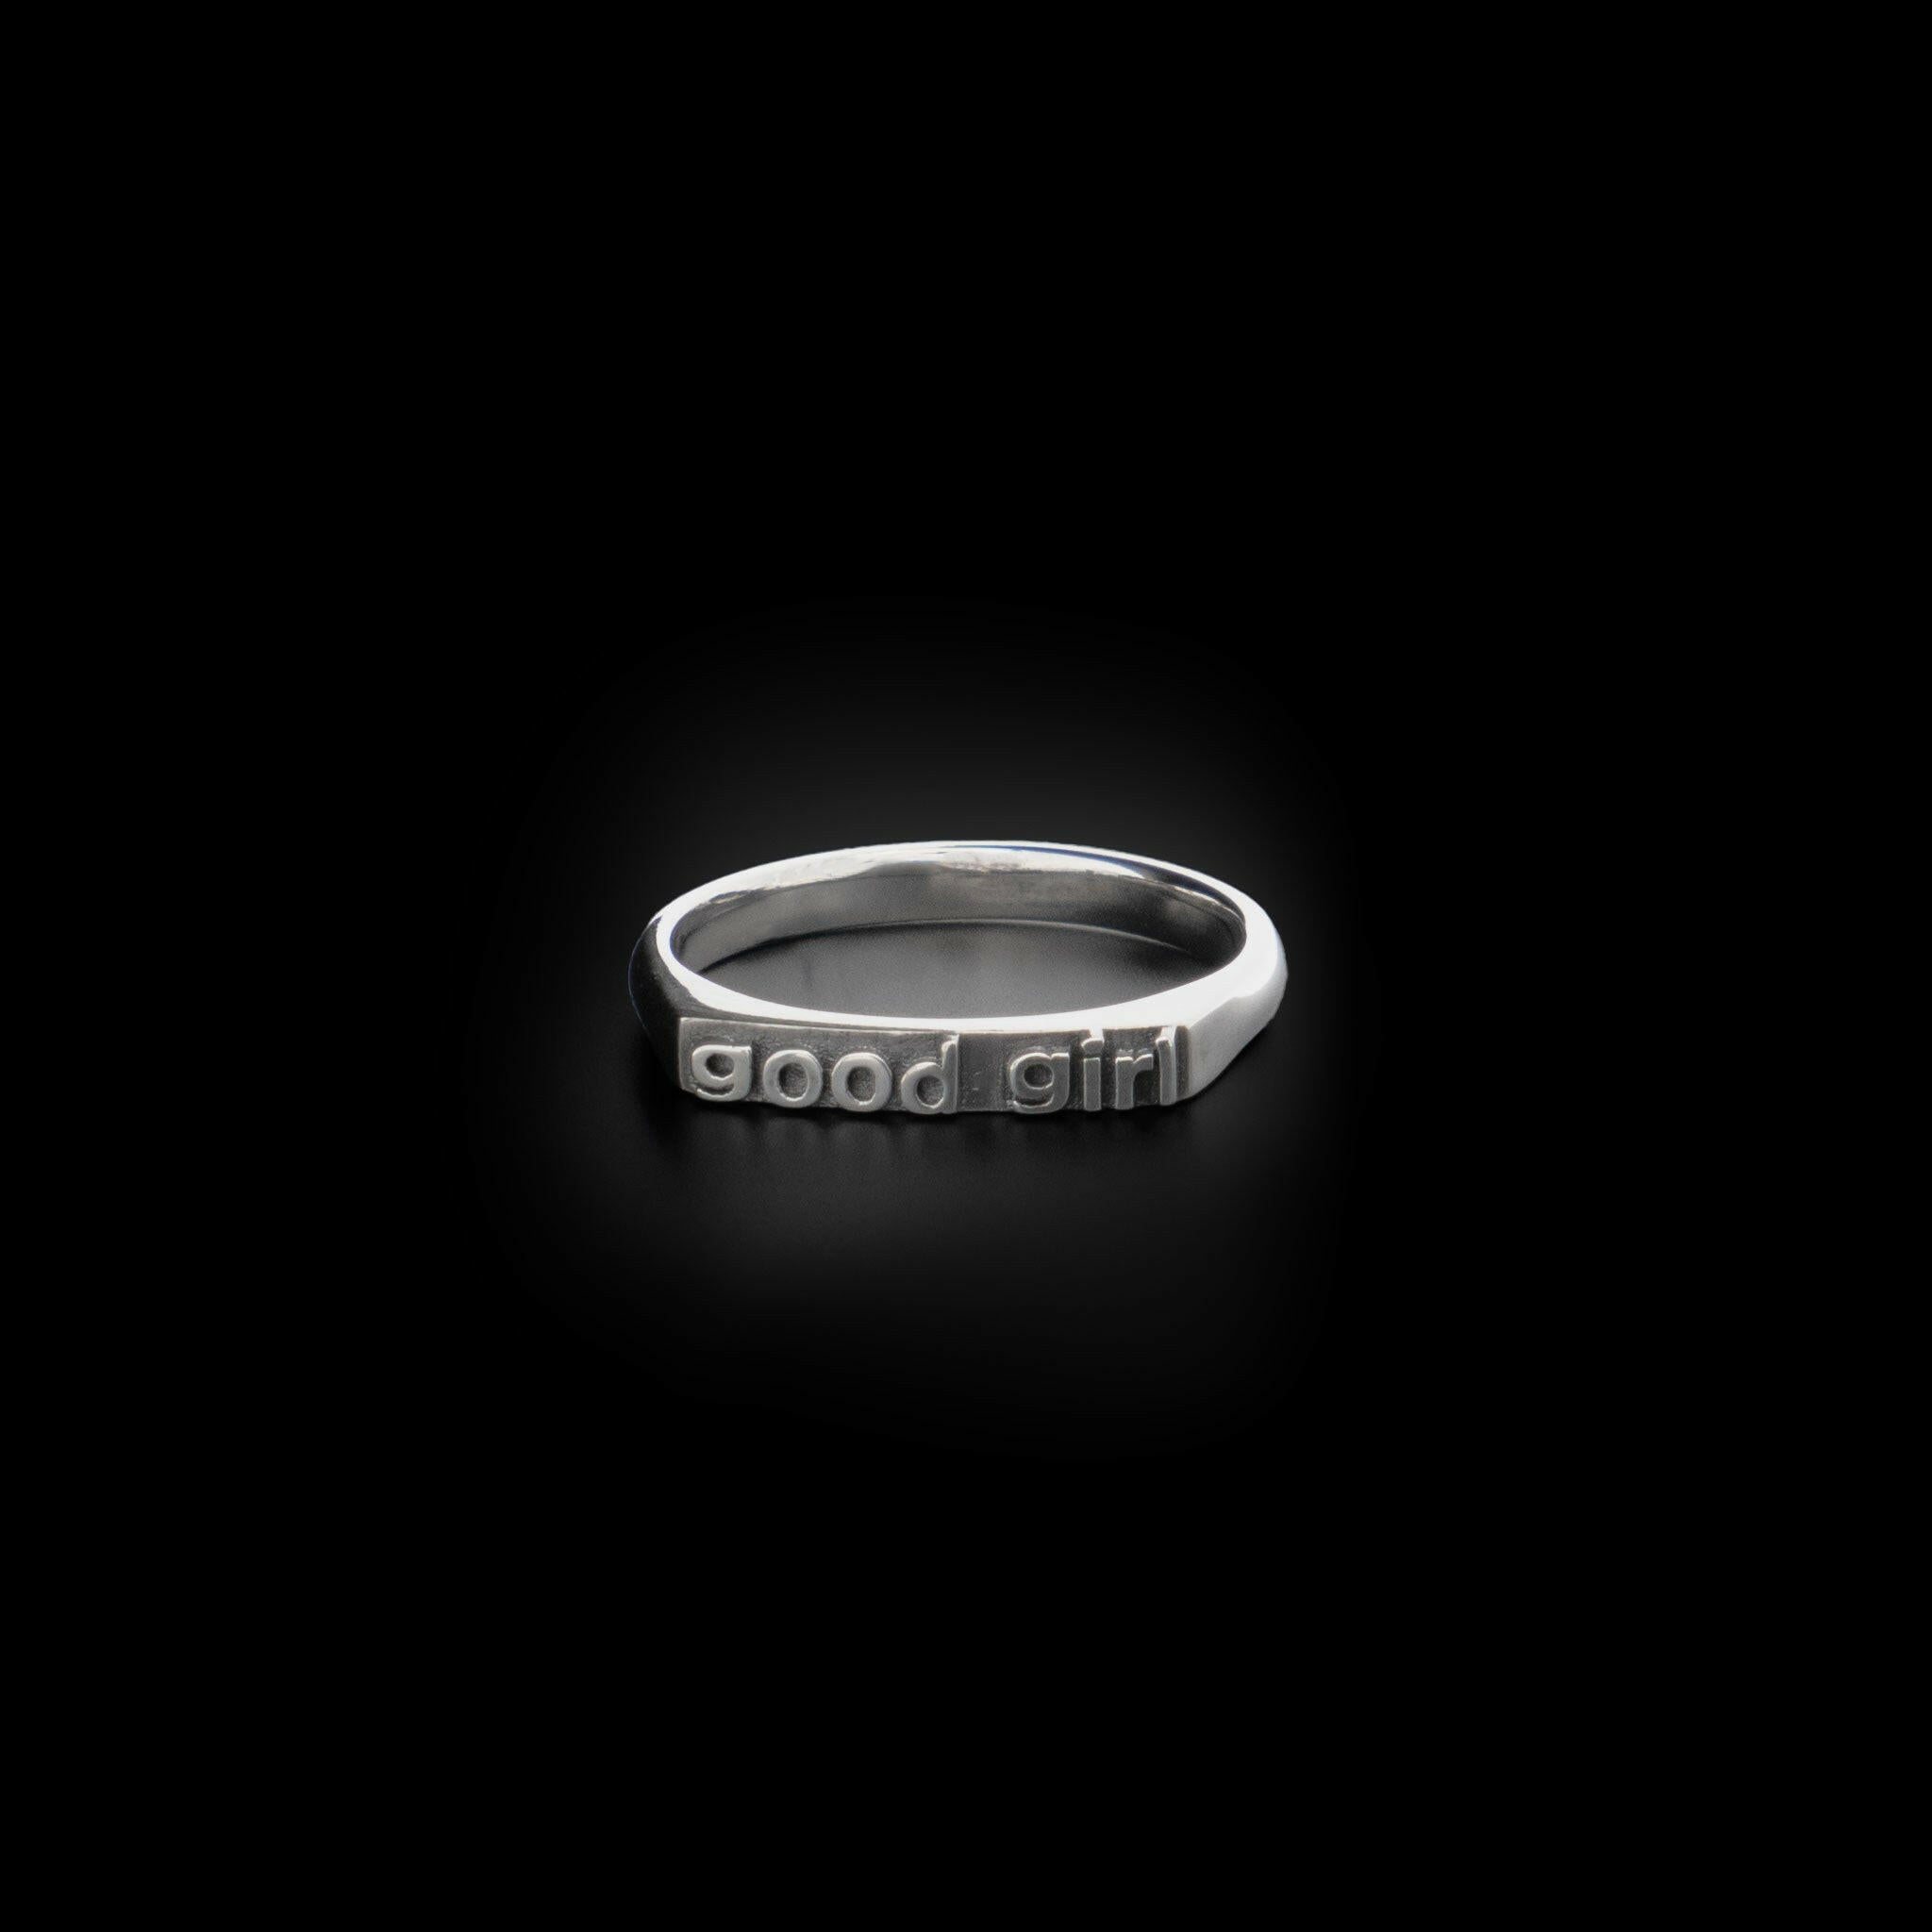 Right angle view of Sterling Silver ring that reads "good girl"